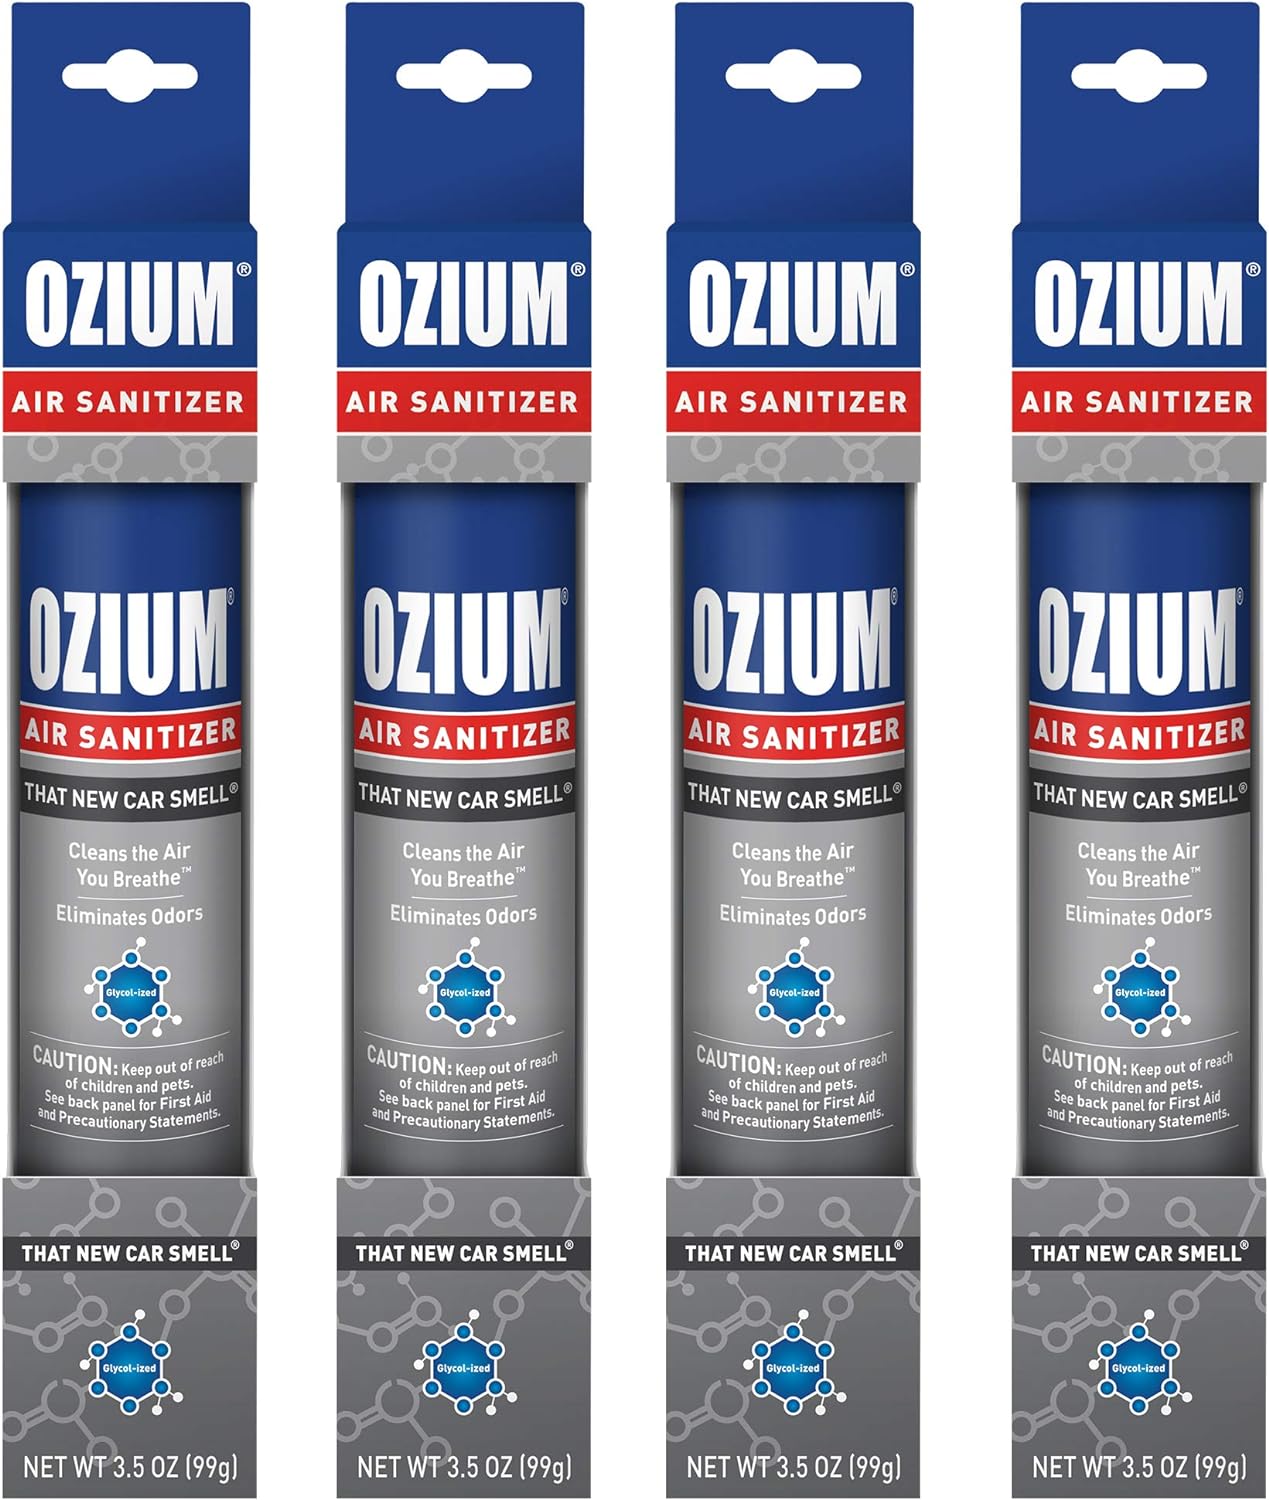 Ozium 3.5 Oz. Air Sanitizer & Odor Eliminator for Homes, Cars, Offices and More, New Car Scent, 4 Pack (OZM-22-4)